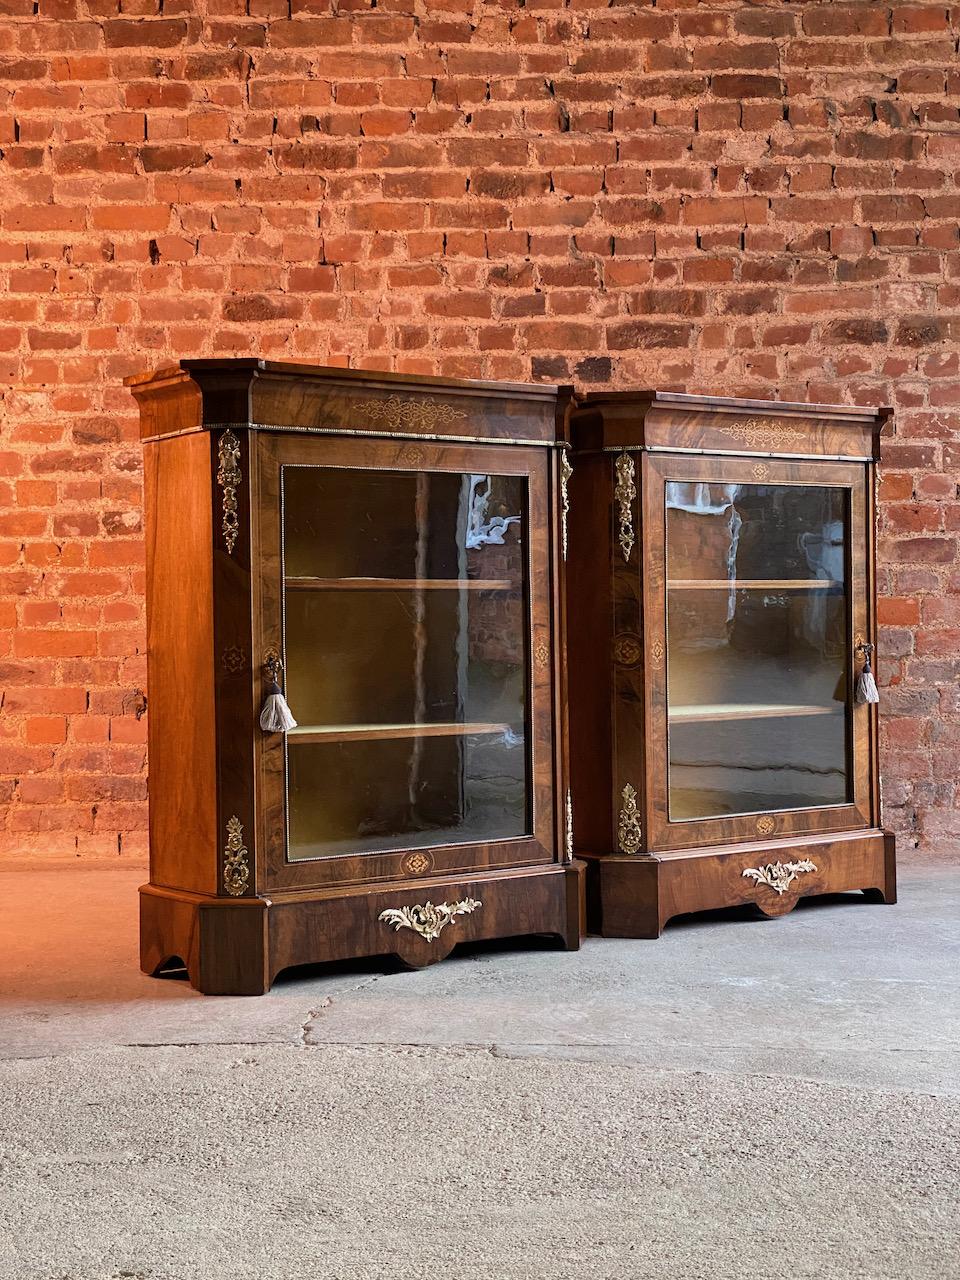 Antique pair of walnut pier cabinets Victorian, circa 1880

Pair of late 19th century Victorian inlaid walnut side or pier cabinets England circa 1880, each of canted breakfront form, the figured top over foliate scroll-inlaid frieze and